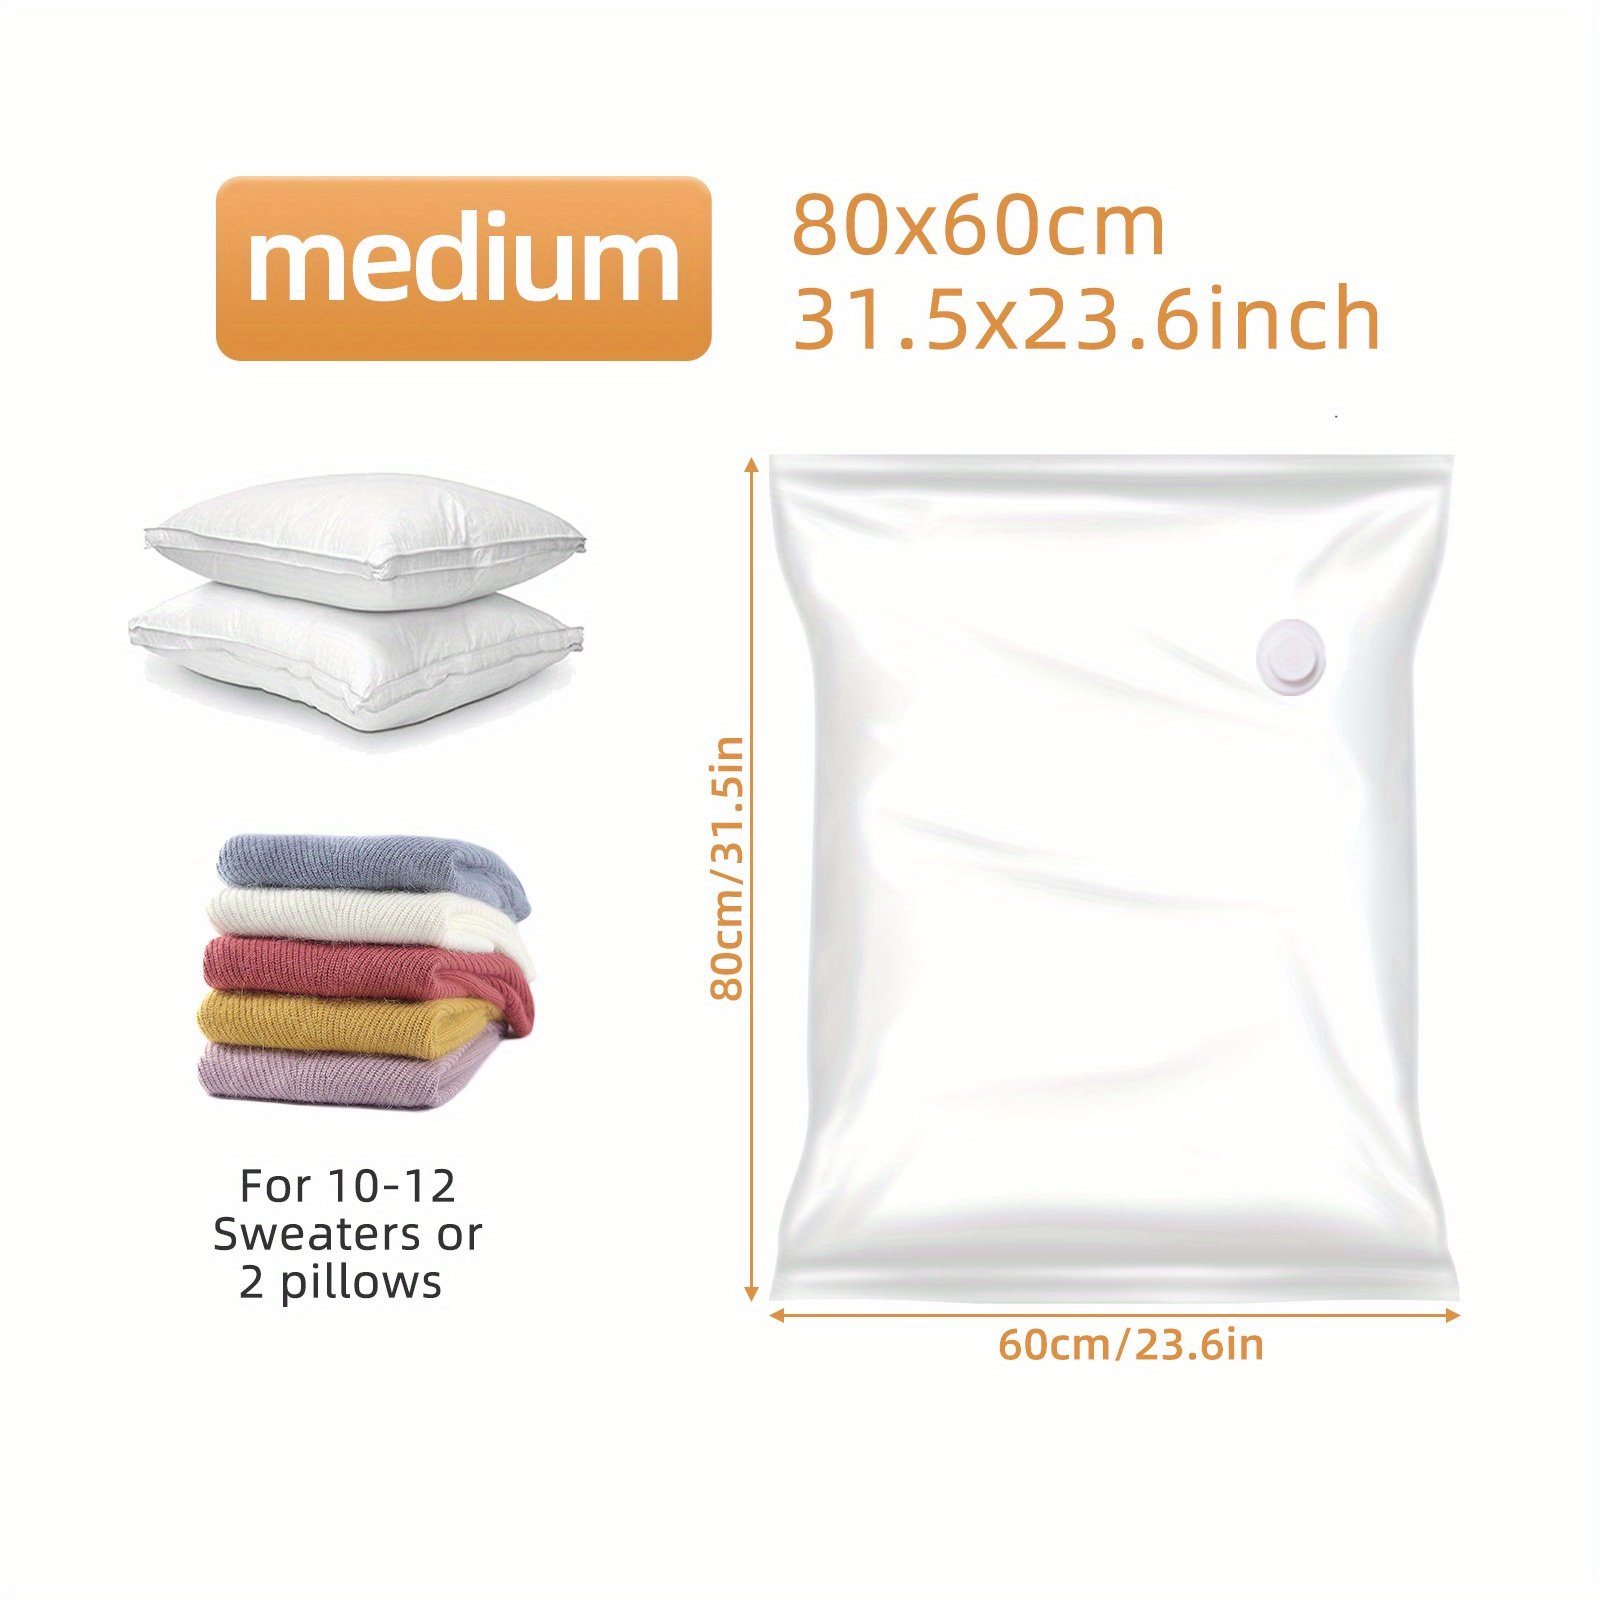 Maximize Your Storage Space With Vacuum Storage Bags - Temu